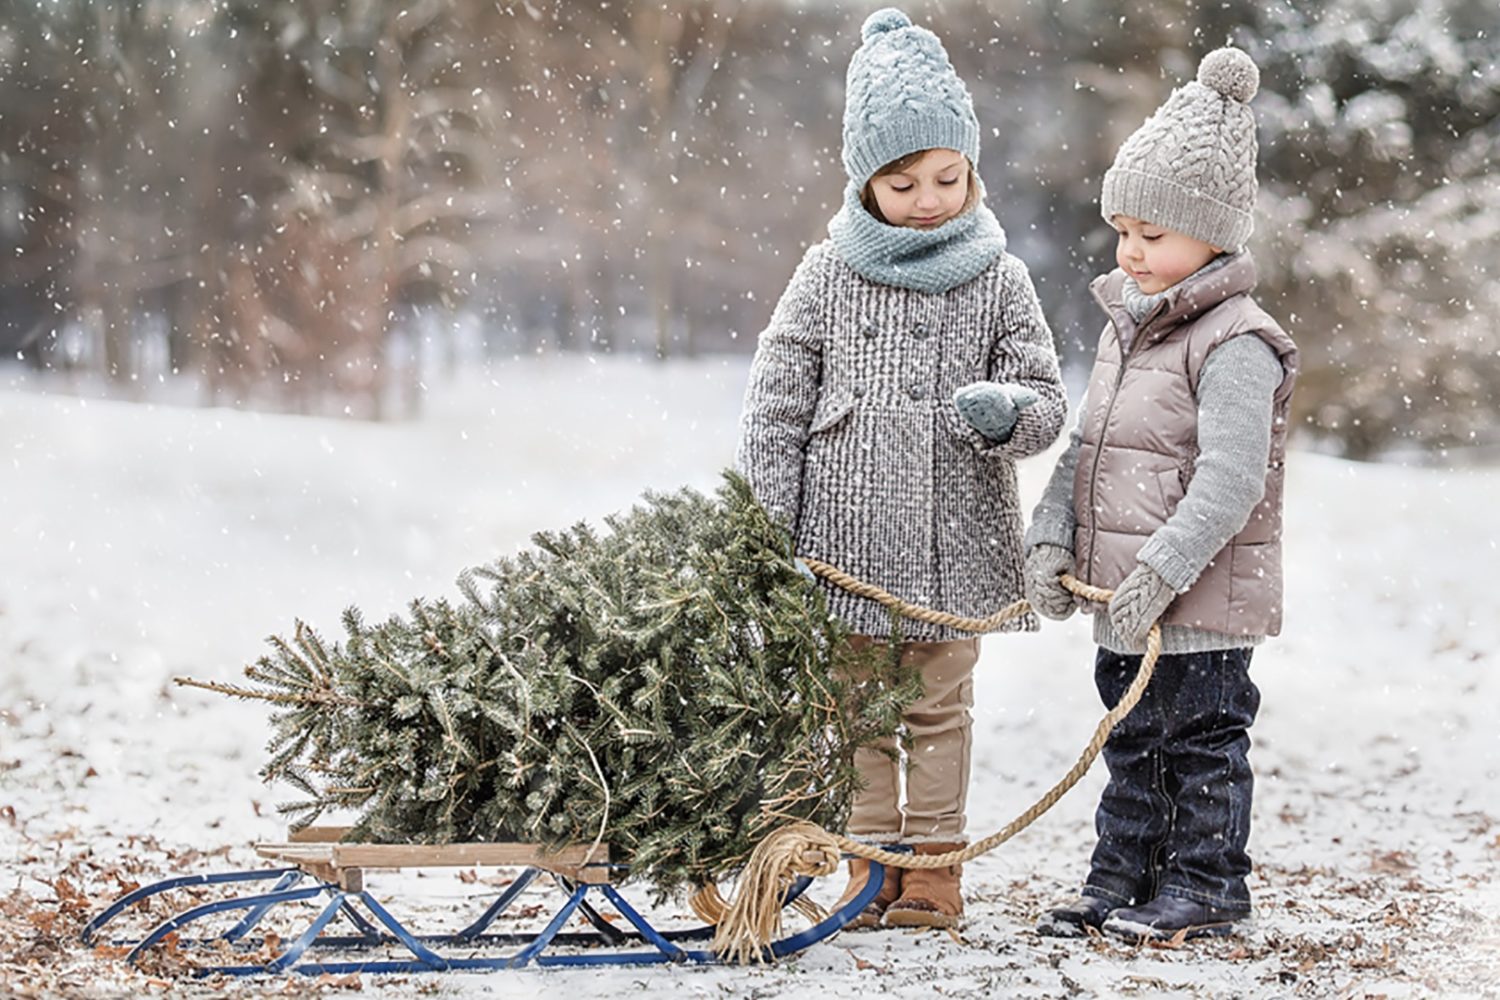 Eight tips for photographing your family around the holidays